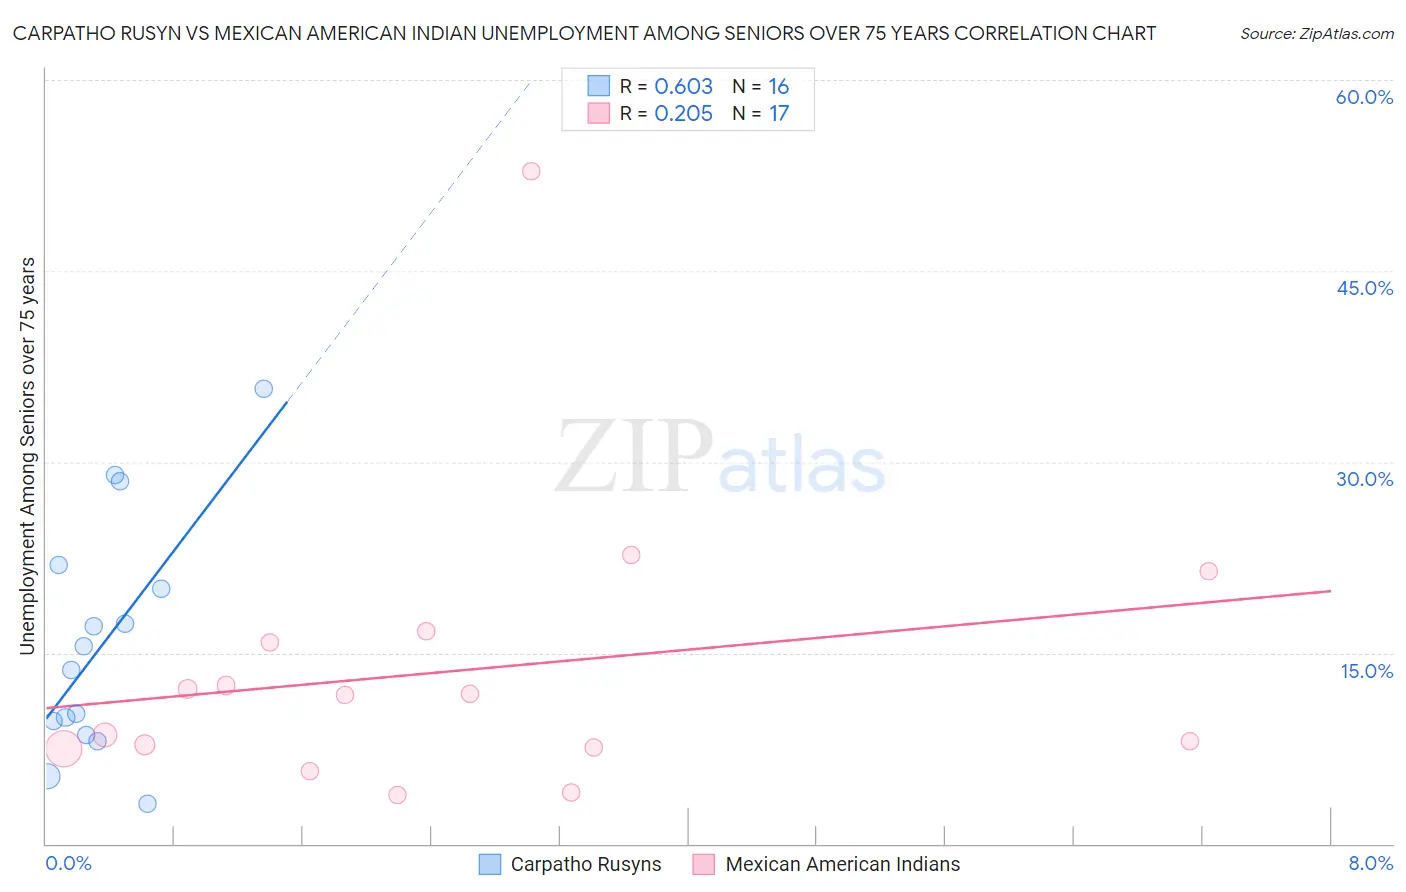 Carpatho Rusyn vs Mexican American Indian Unemployment Among Seniors over 75 years